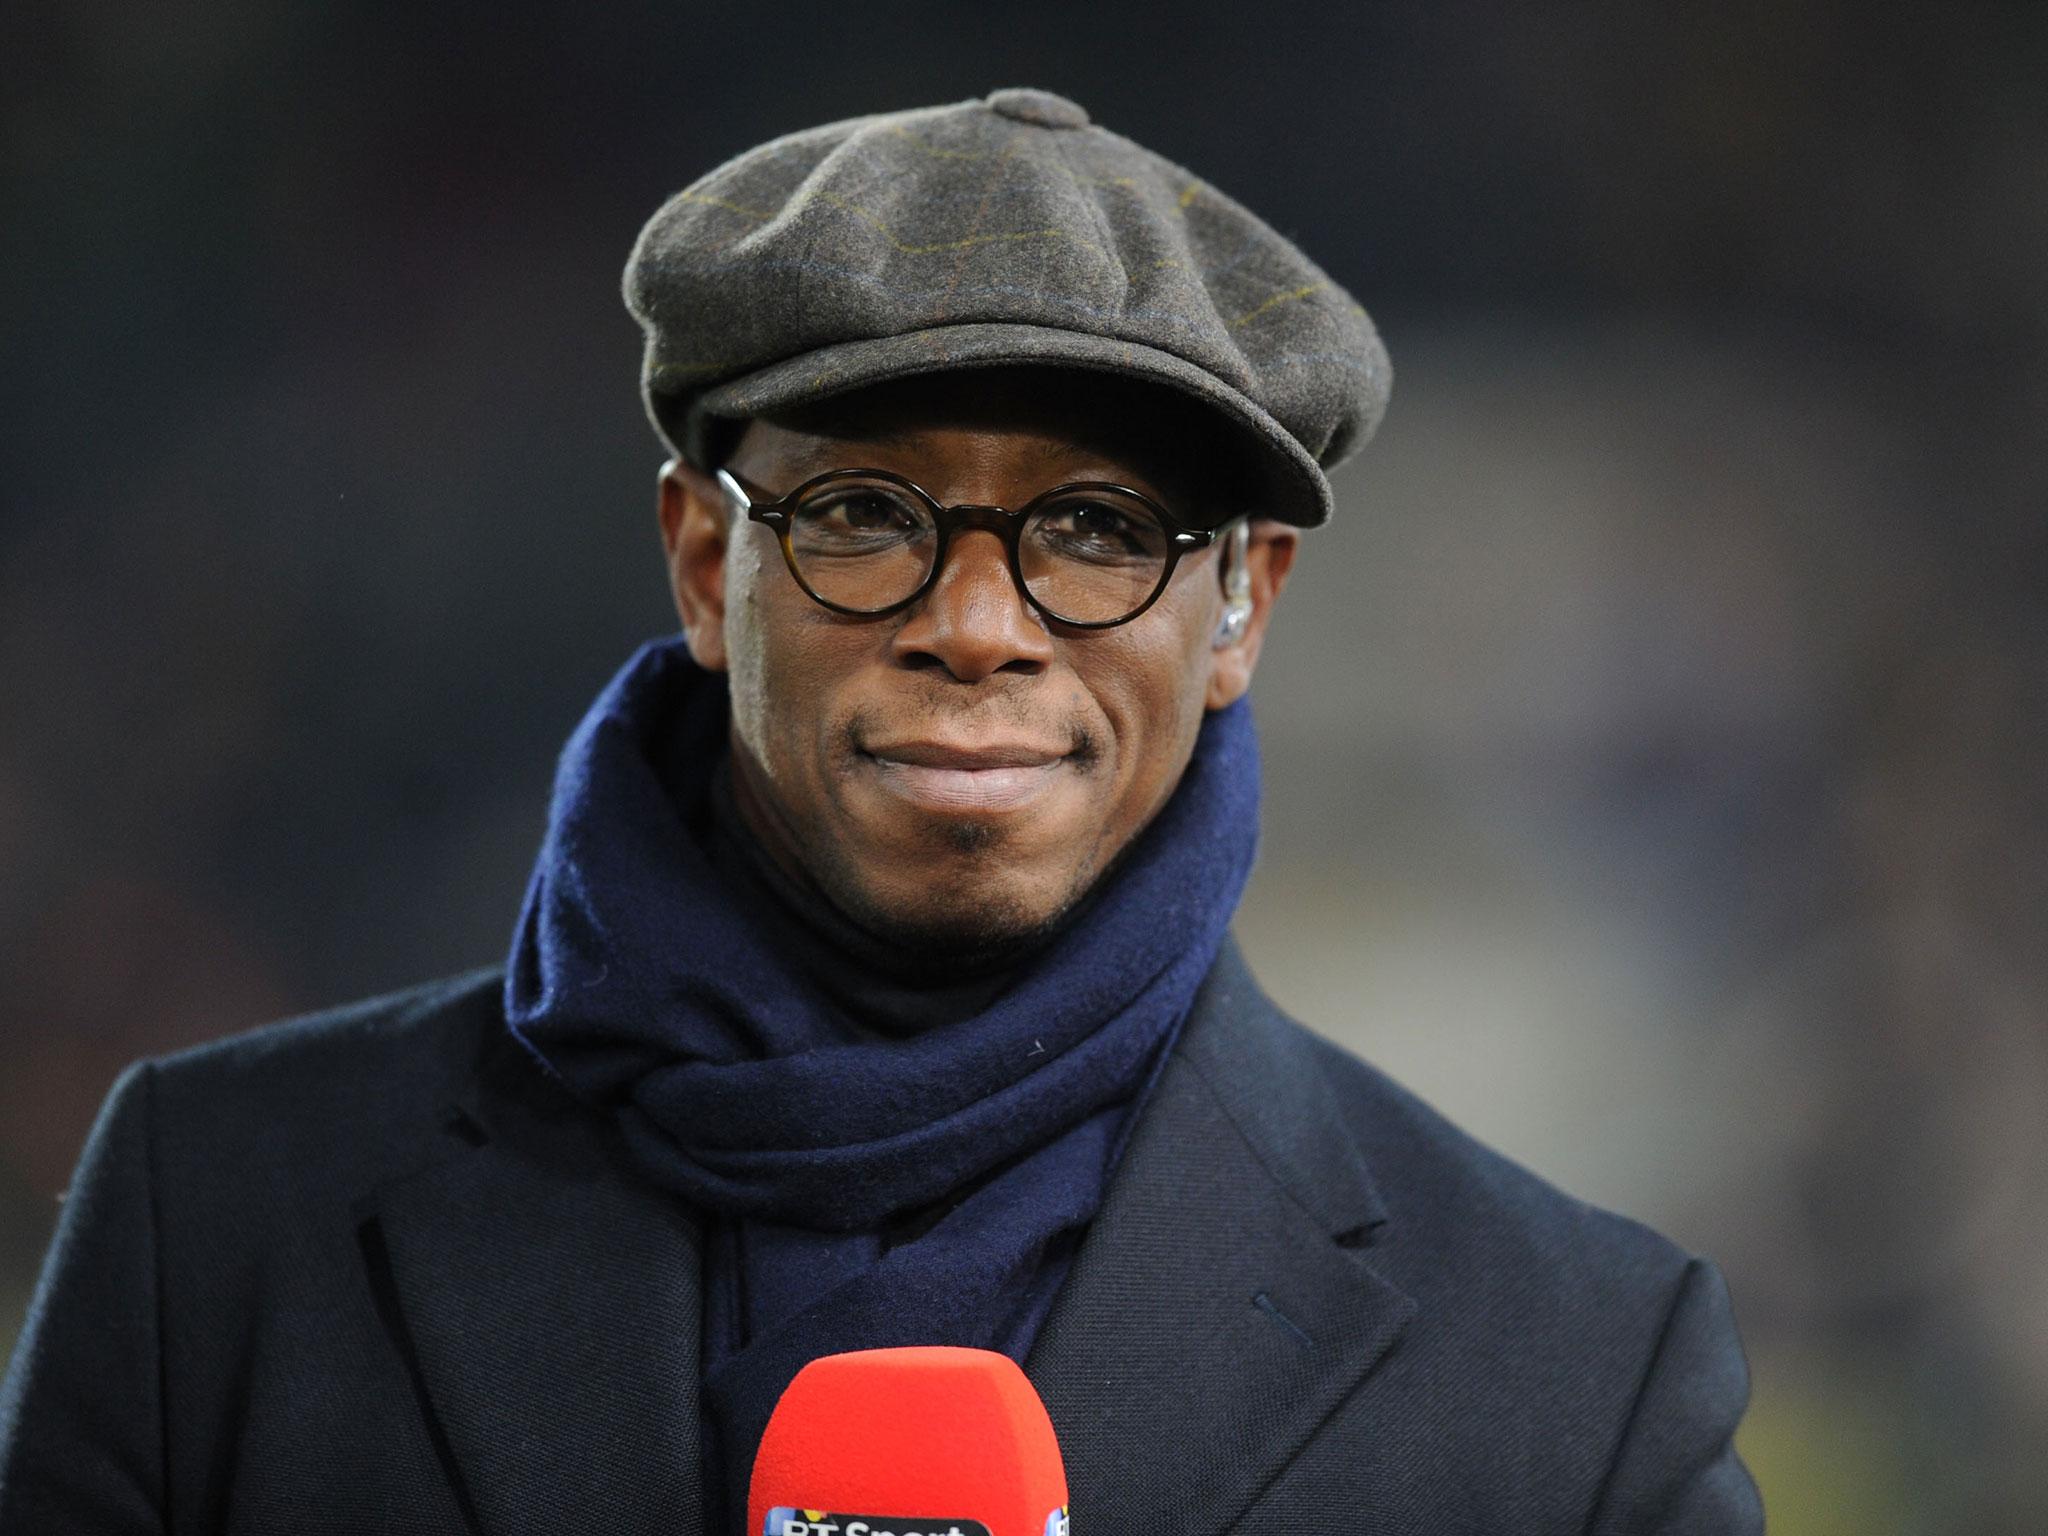 Ian Wright gave a foul-mouthed assessment of Arsenal's 5-1 defeat by Bayern Munich